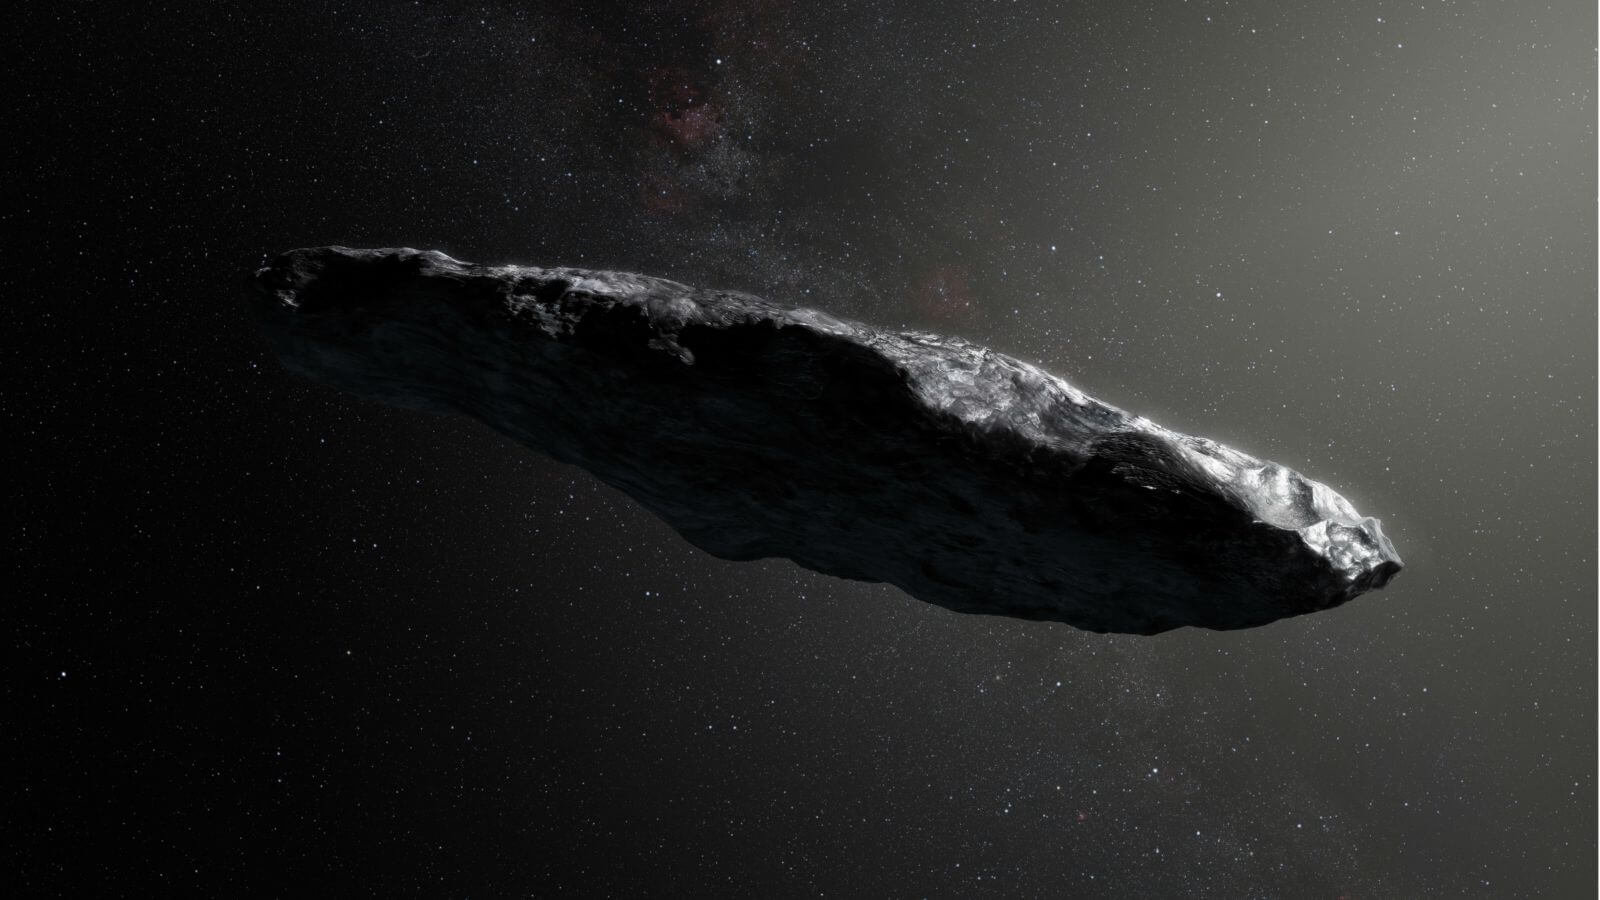 This strange object is the first interstellar asteroid ever observed